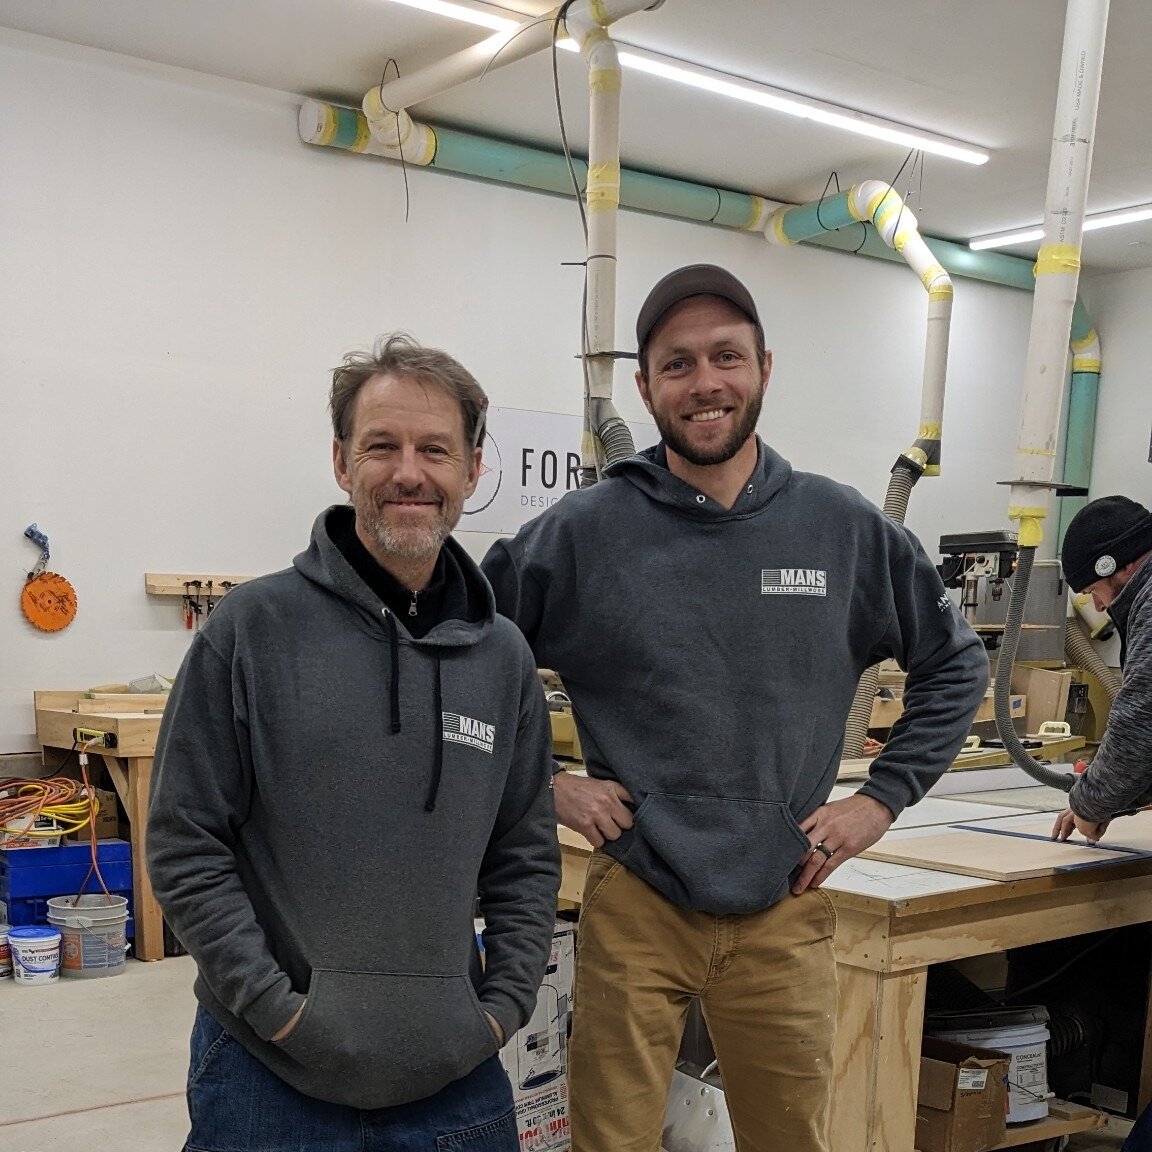 Apparently today has been named #MansLumberMonday after Brian, Project Manager, and Mike, Carpenter, both showed up today in Mans Lumber sweatshirts! 
 
@manslumber1900